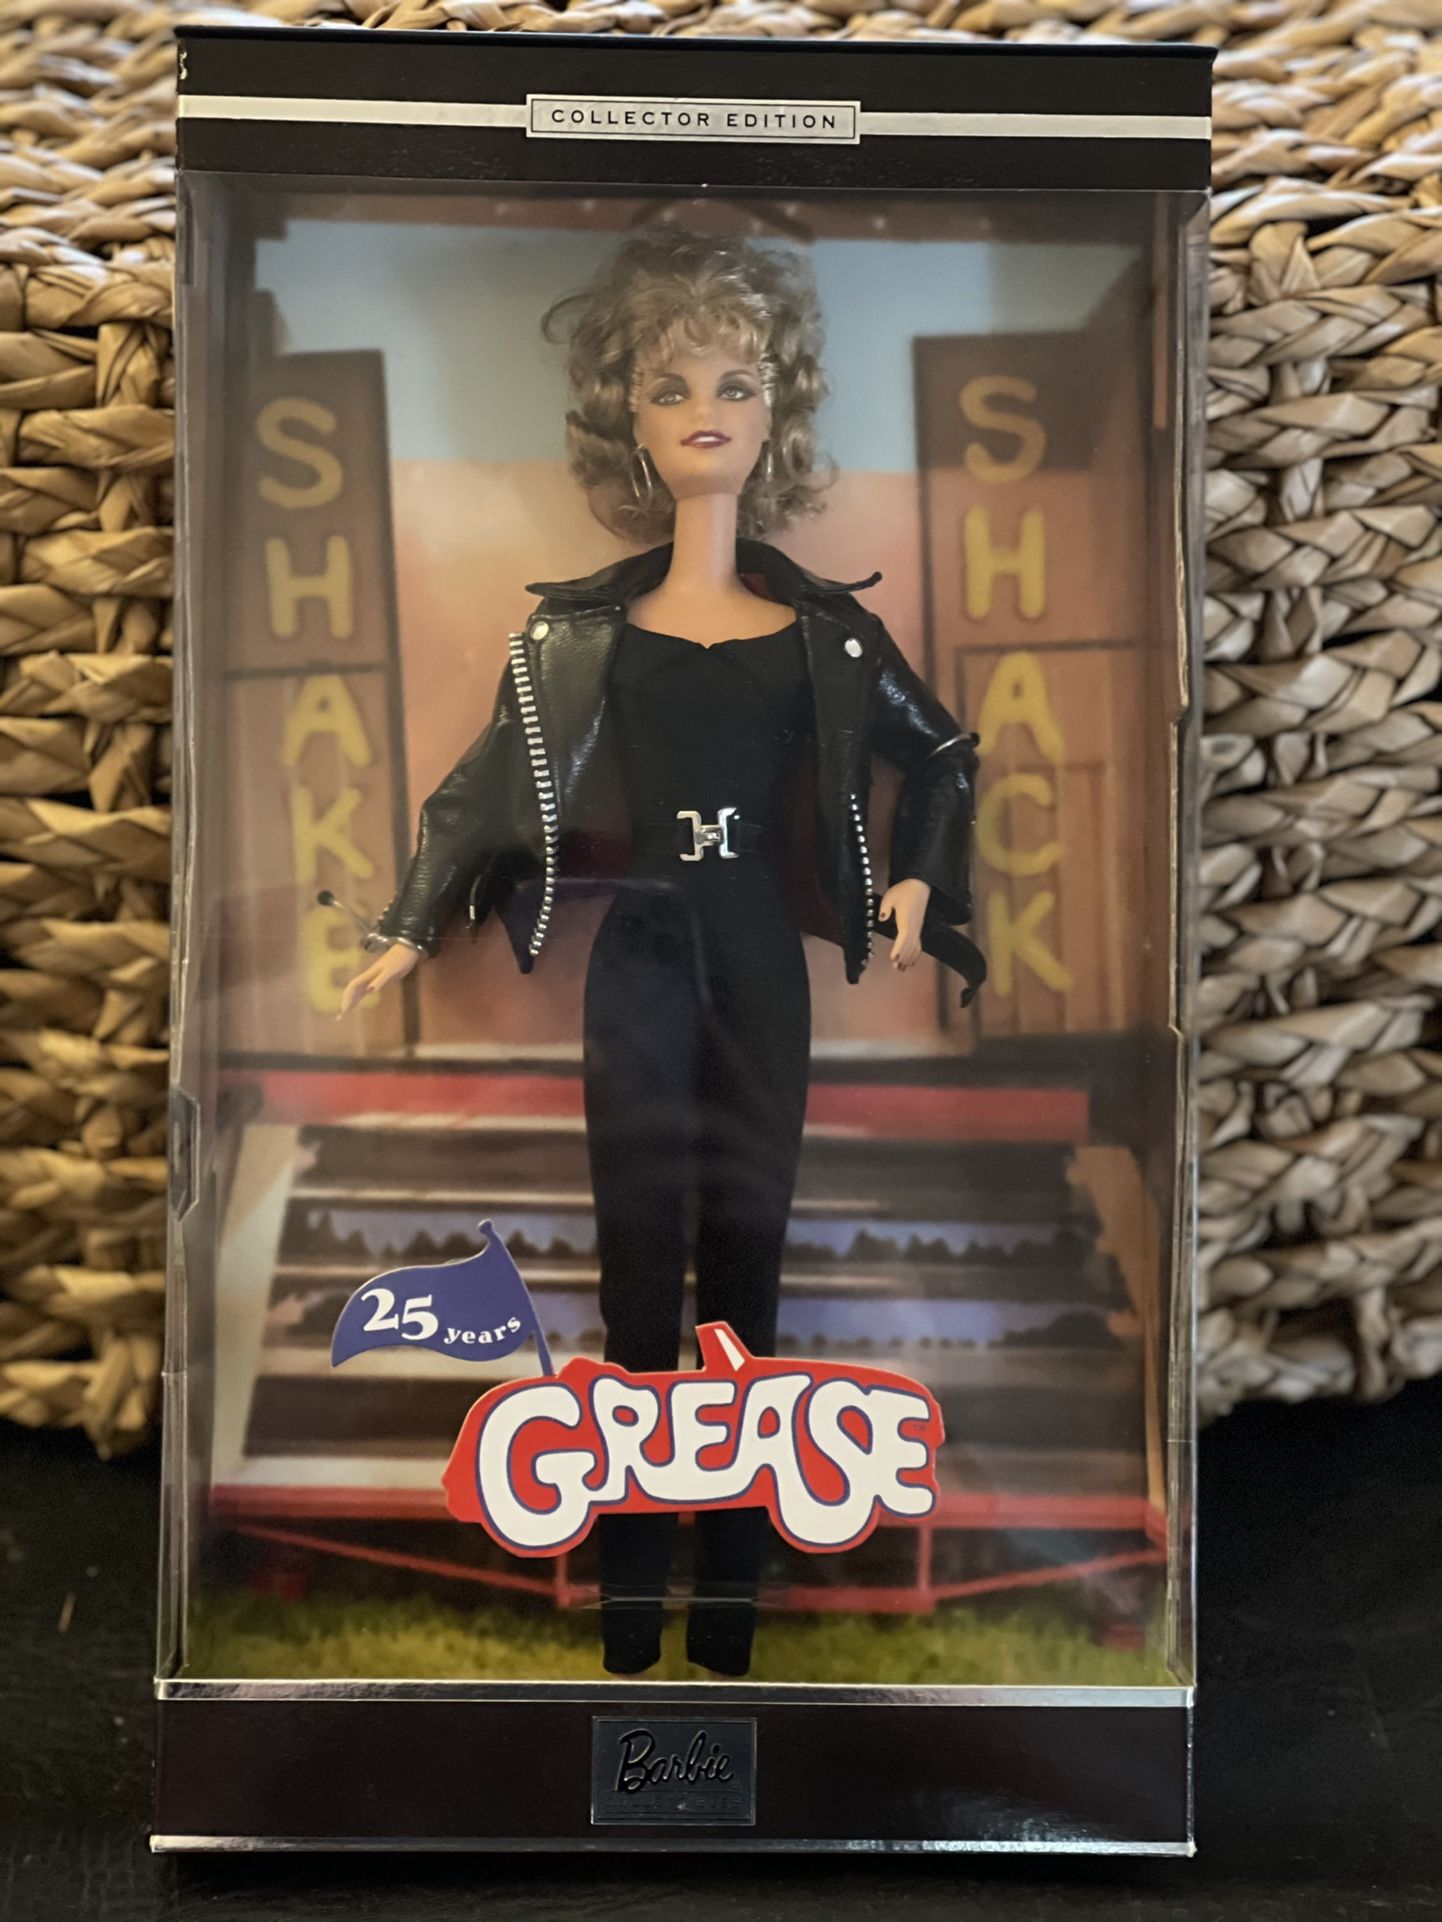 Barbie Doll 25 years Grease Sandy in Black Collector Edition 2003 Mattel NRFB